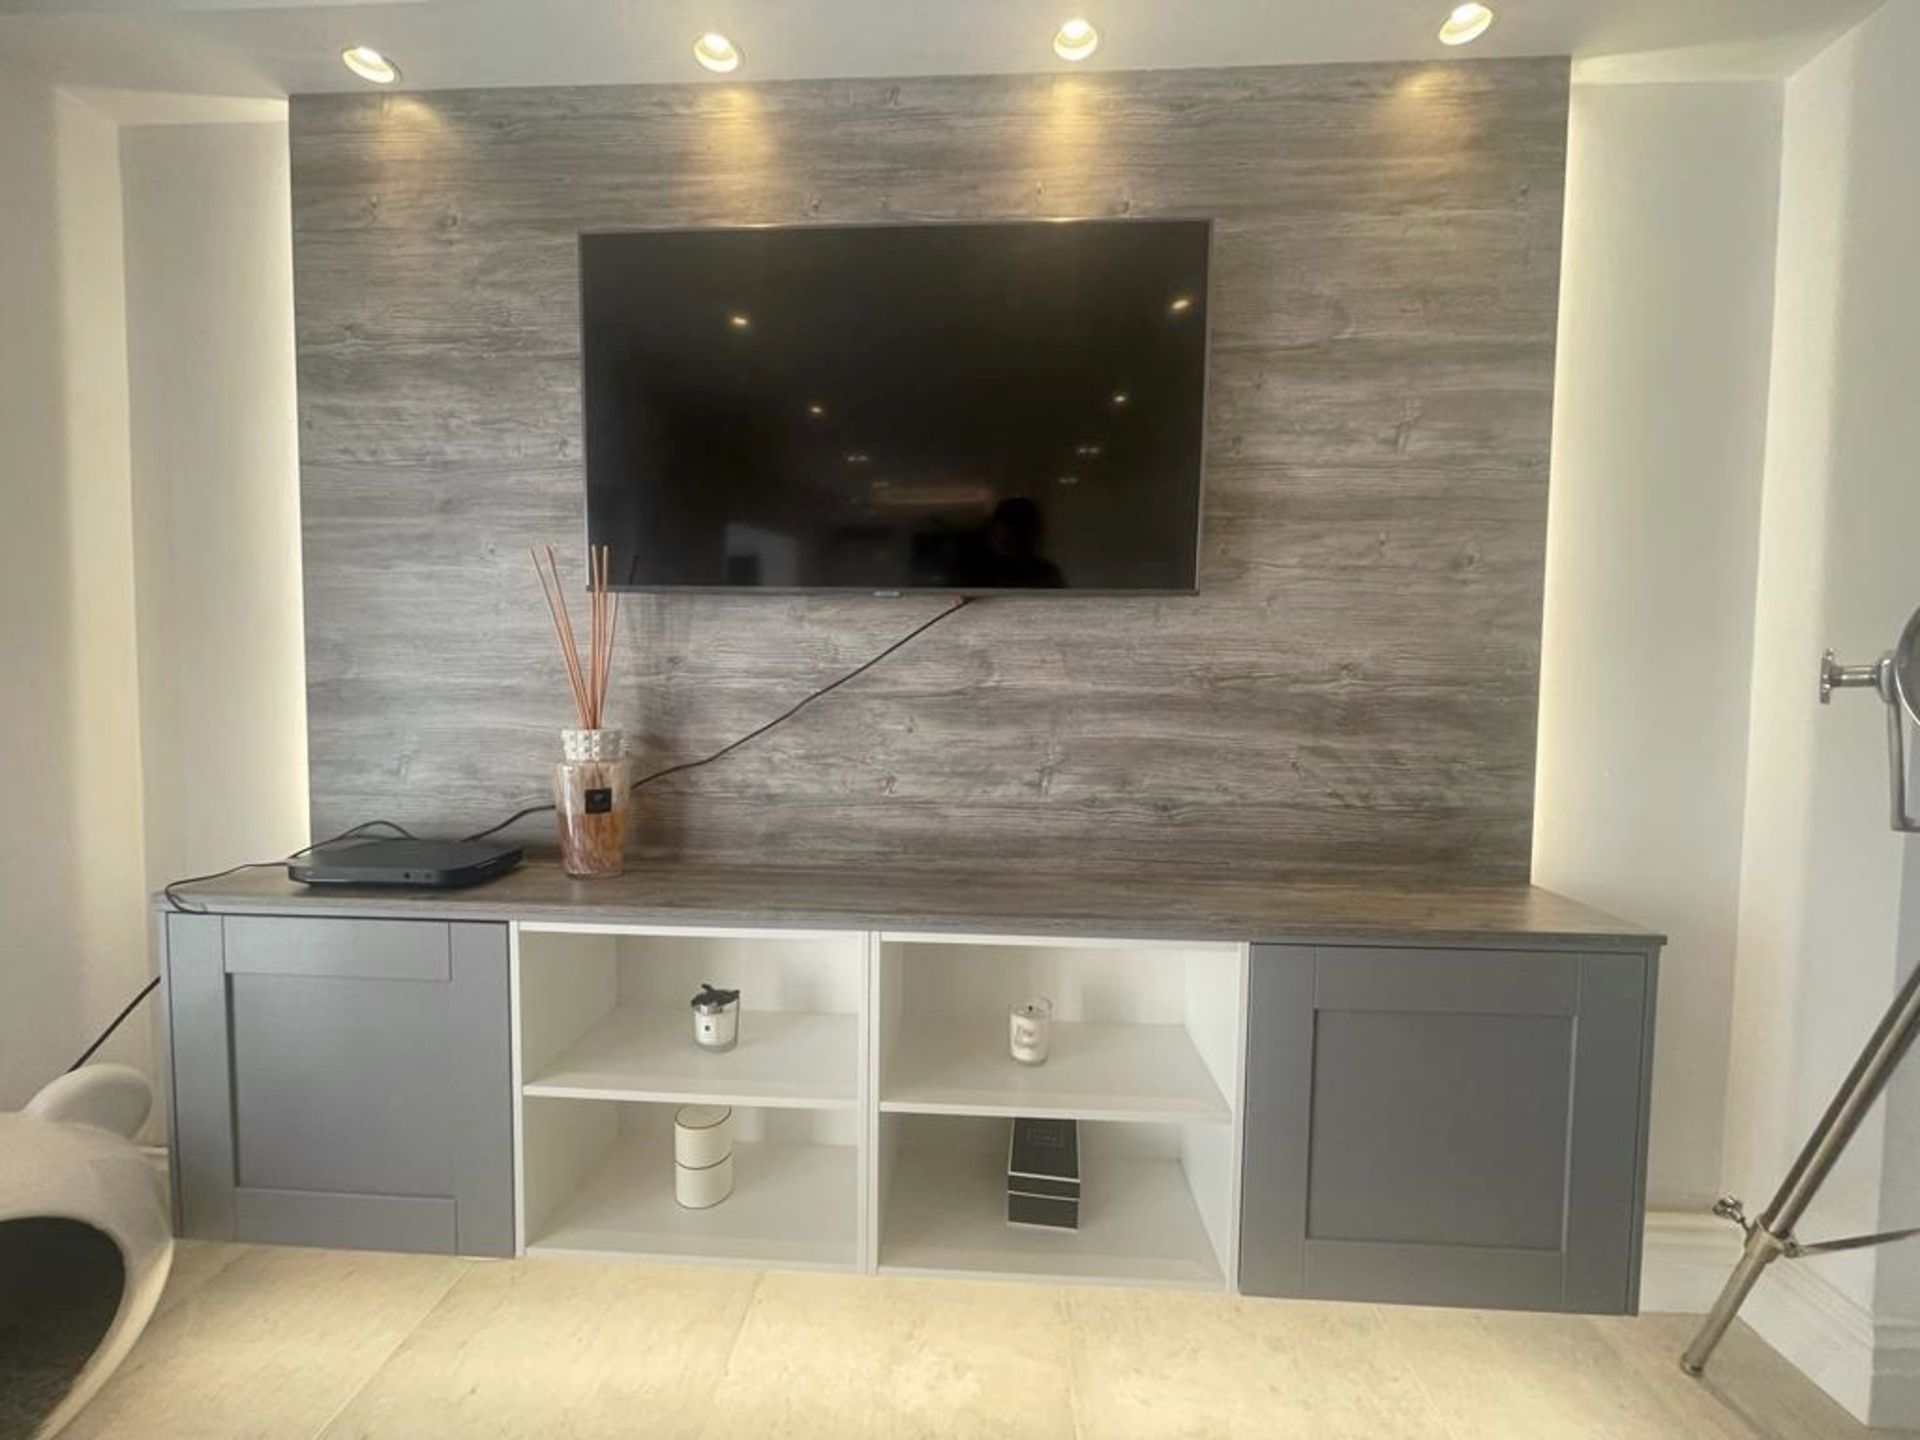 1 x Modern 2.4-Metre Wide TV Wall Unit with Storage in Limed Oak and Grey Finishes